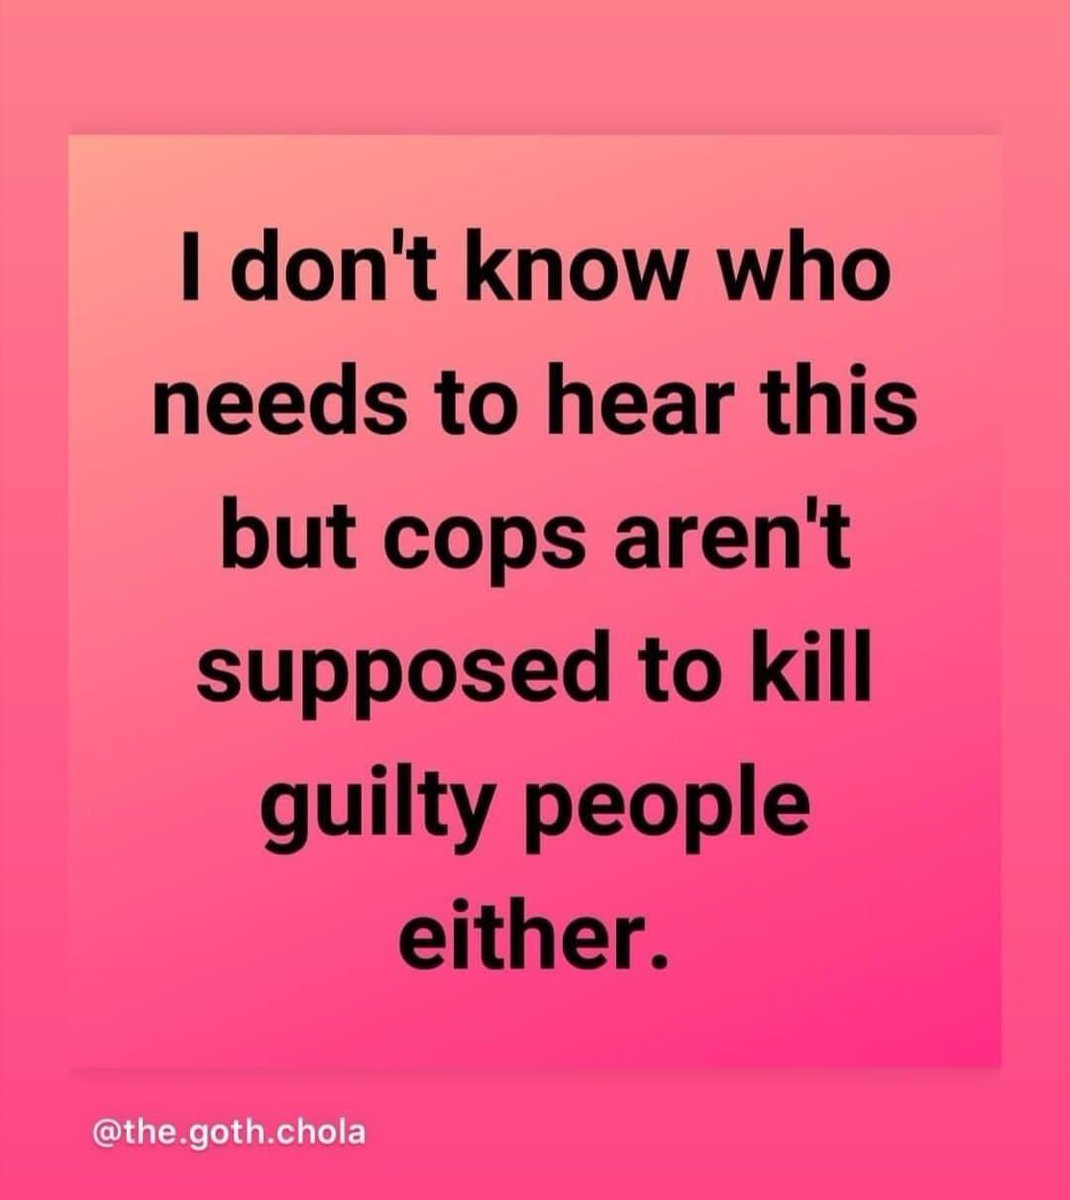 @Jm234Jeri @kellystp @MelissaDSegura @jduffyrice Ah yes, let’s murder people for refusing to follow directions. That’s how America works! Let’s murder someone who breaks the law! I forgot that is how our judicial system works. Silly me 🙄